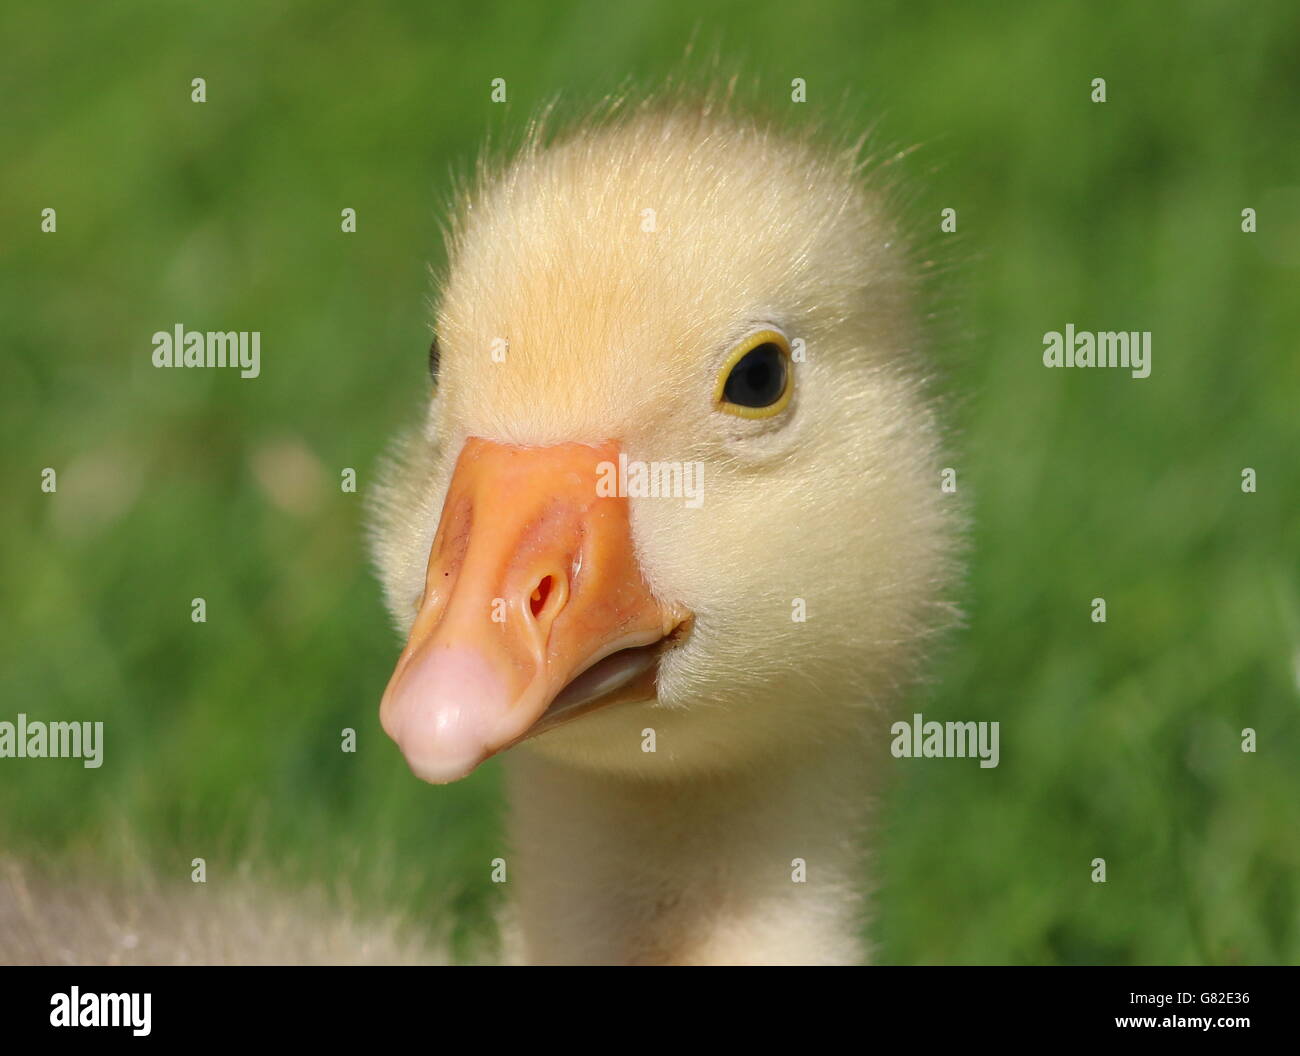 Cute fluffy gosling (Anser anser domesticus) in close-up Stock Photo